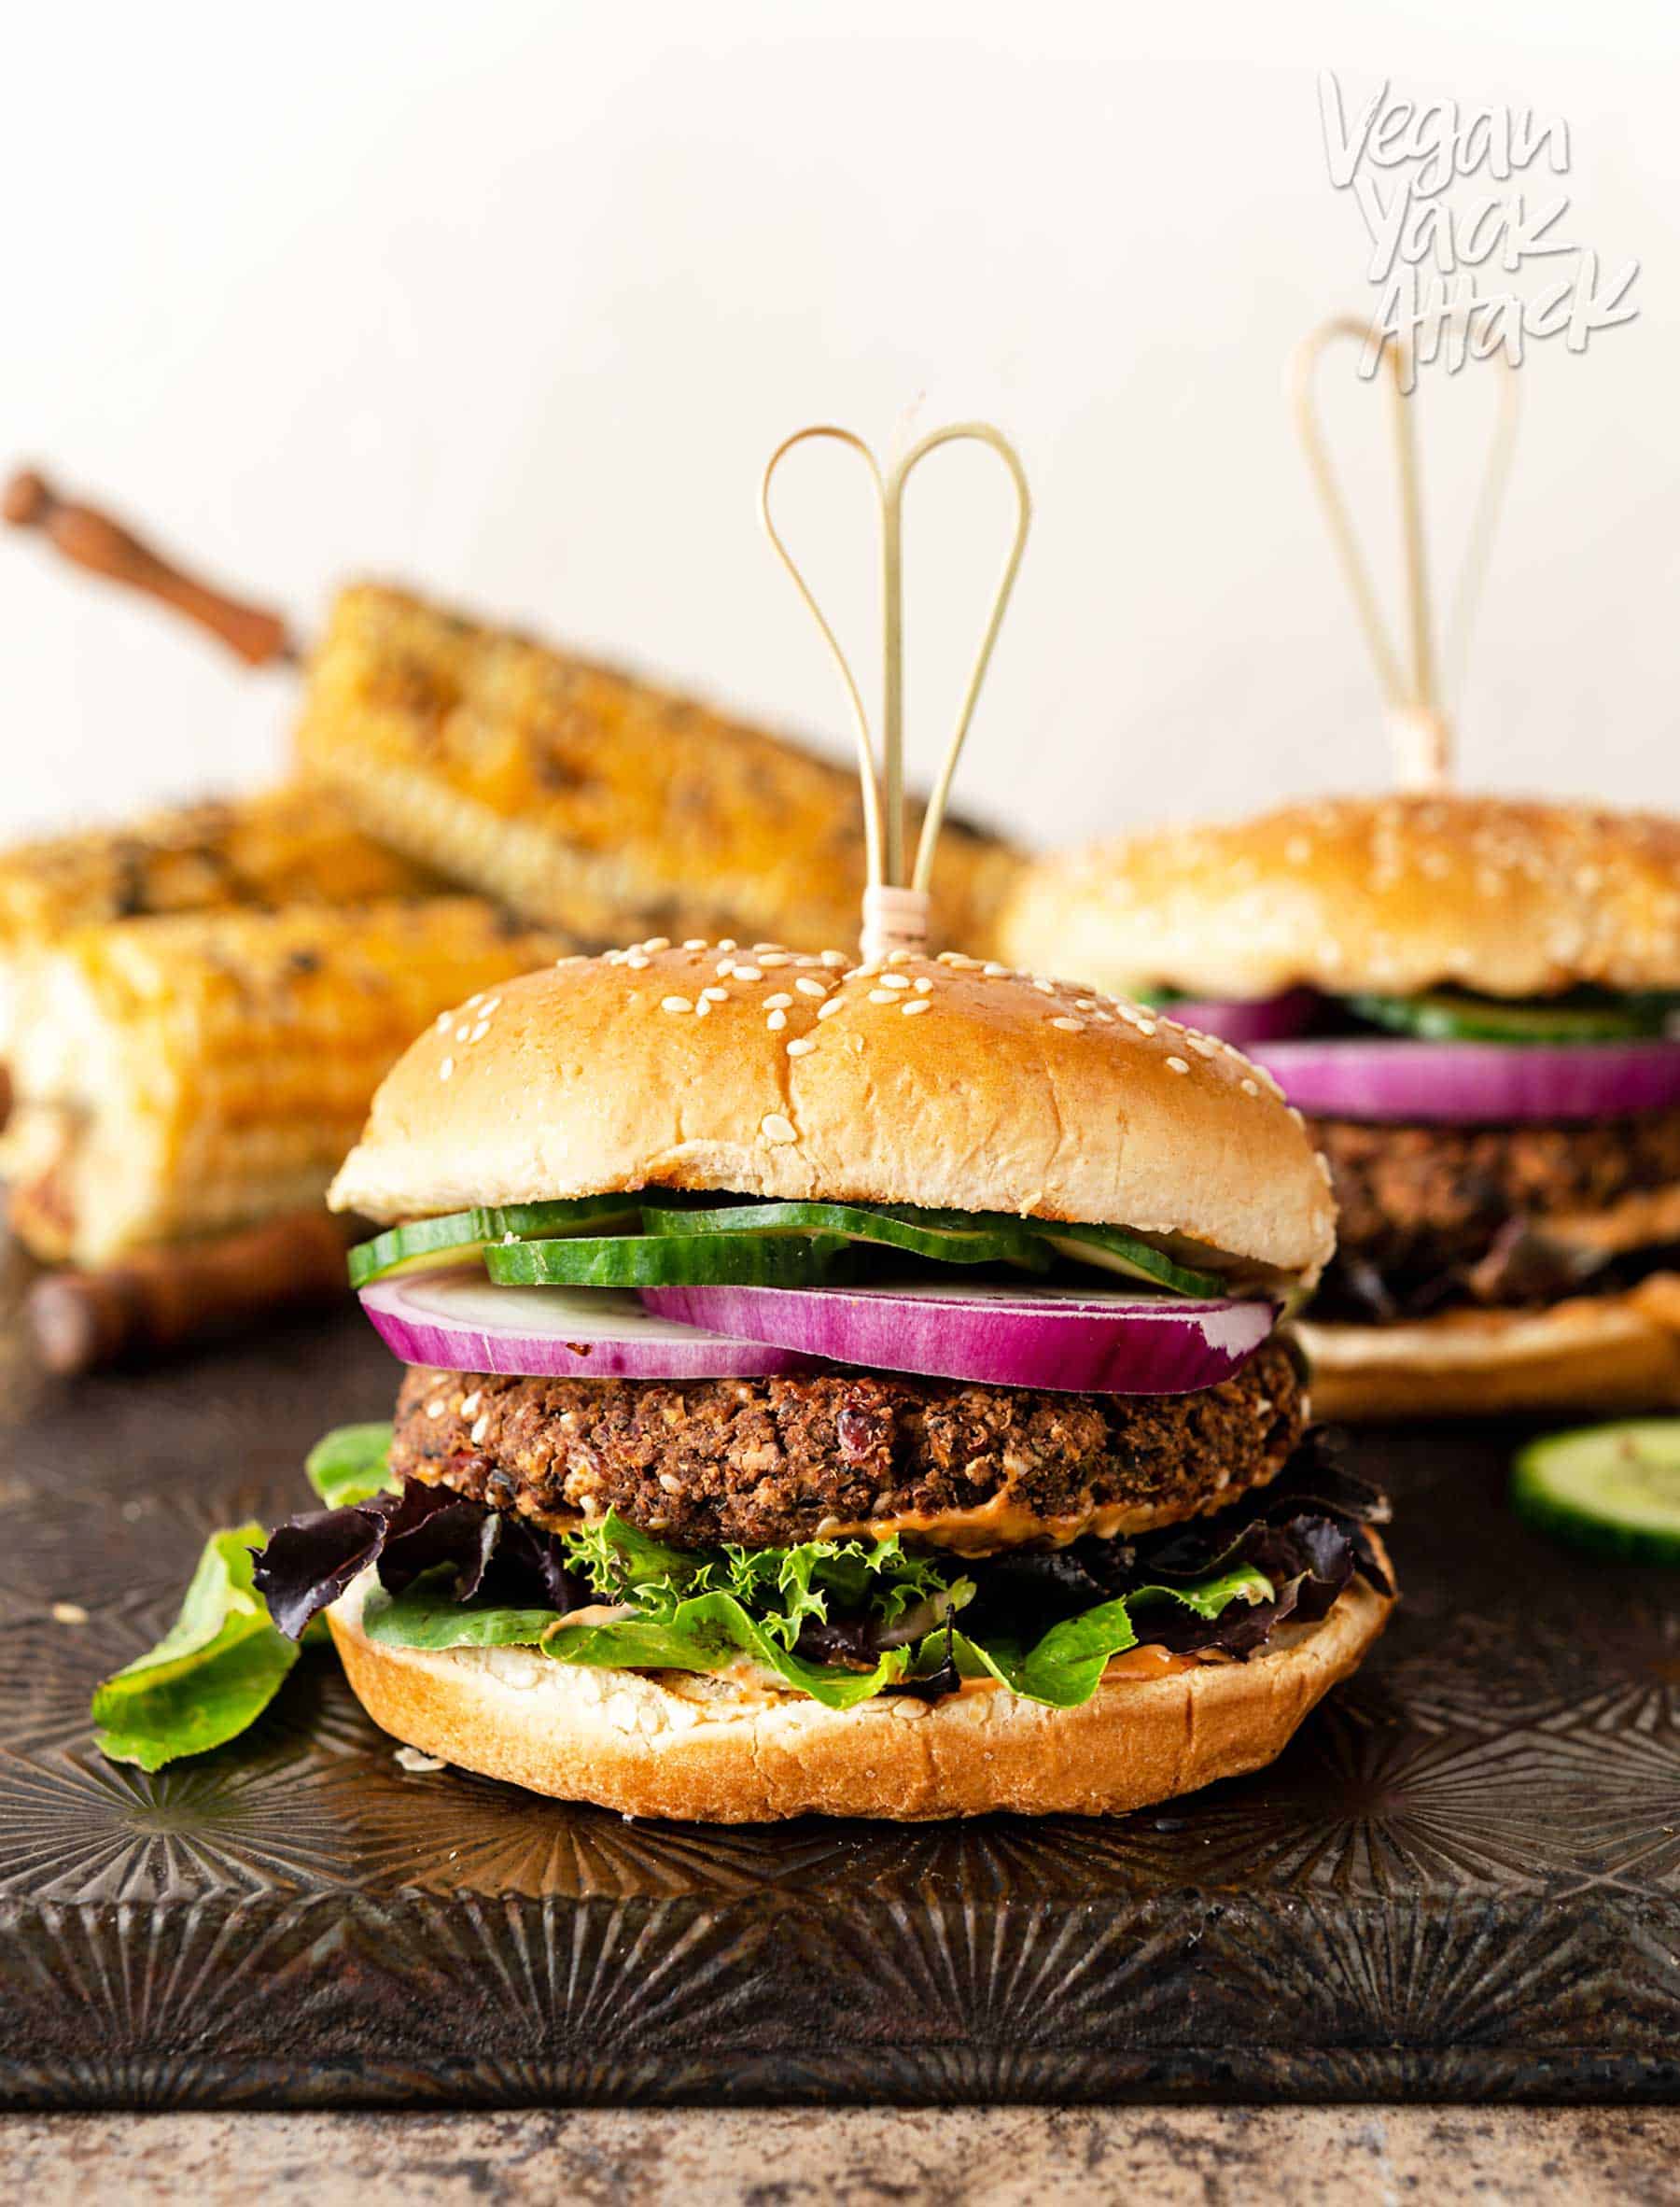 Veggie burger stacked with onion, cucumbers, mixed greens and bun